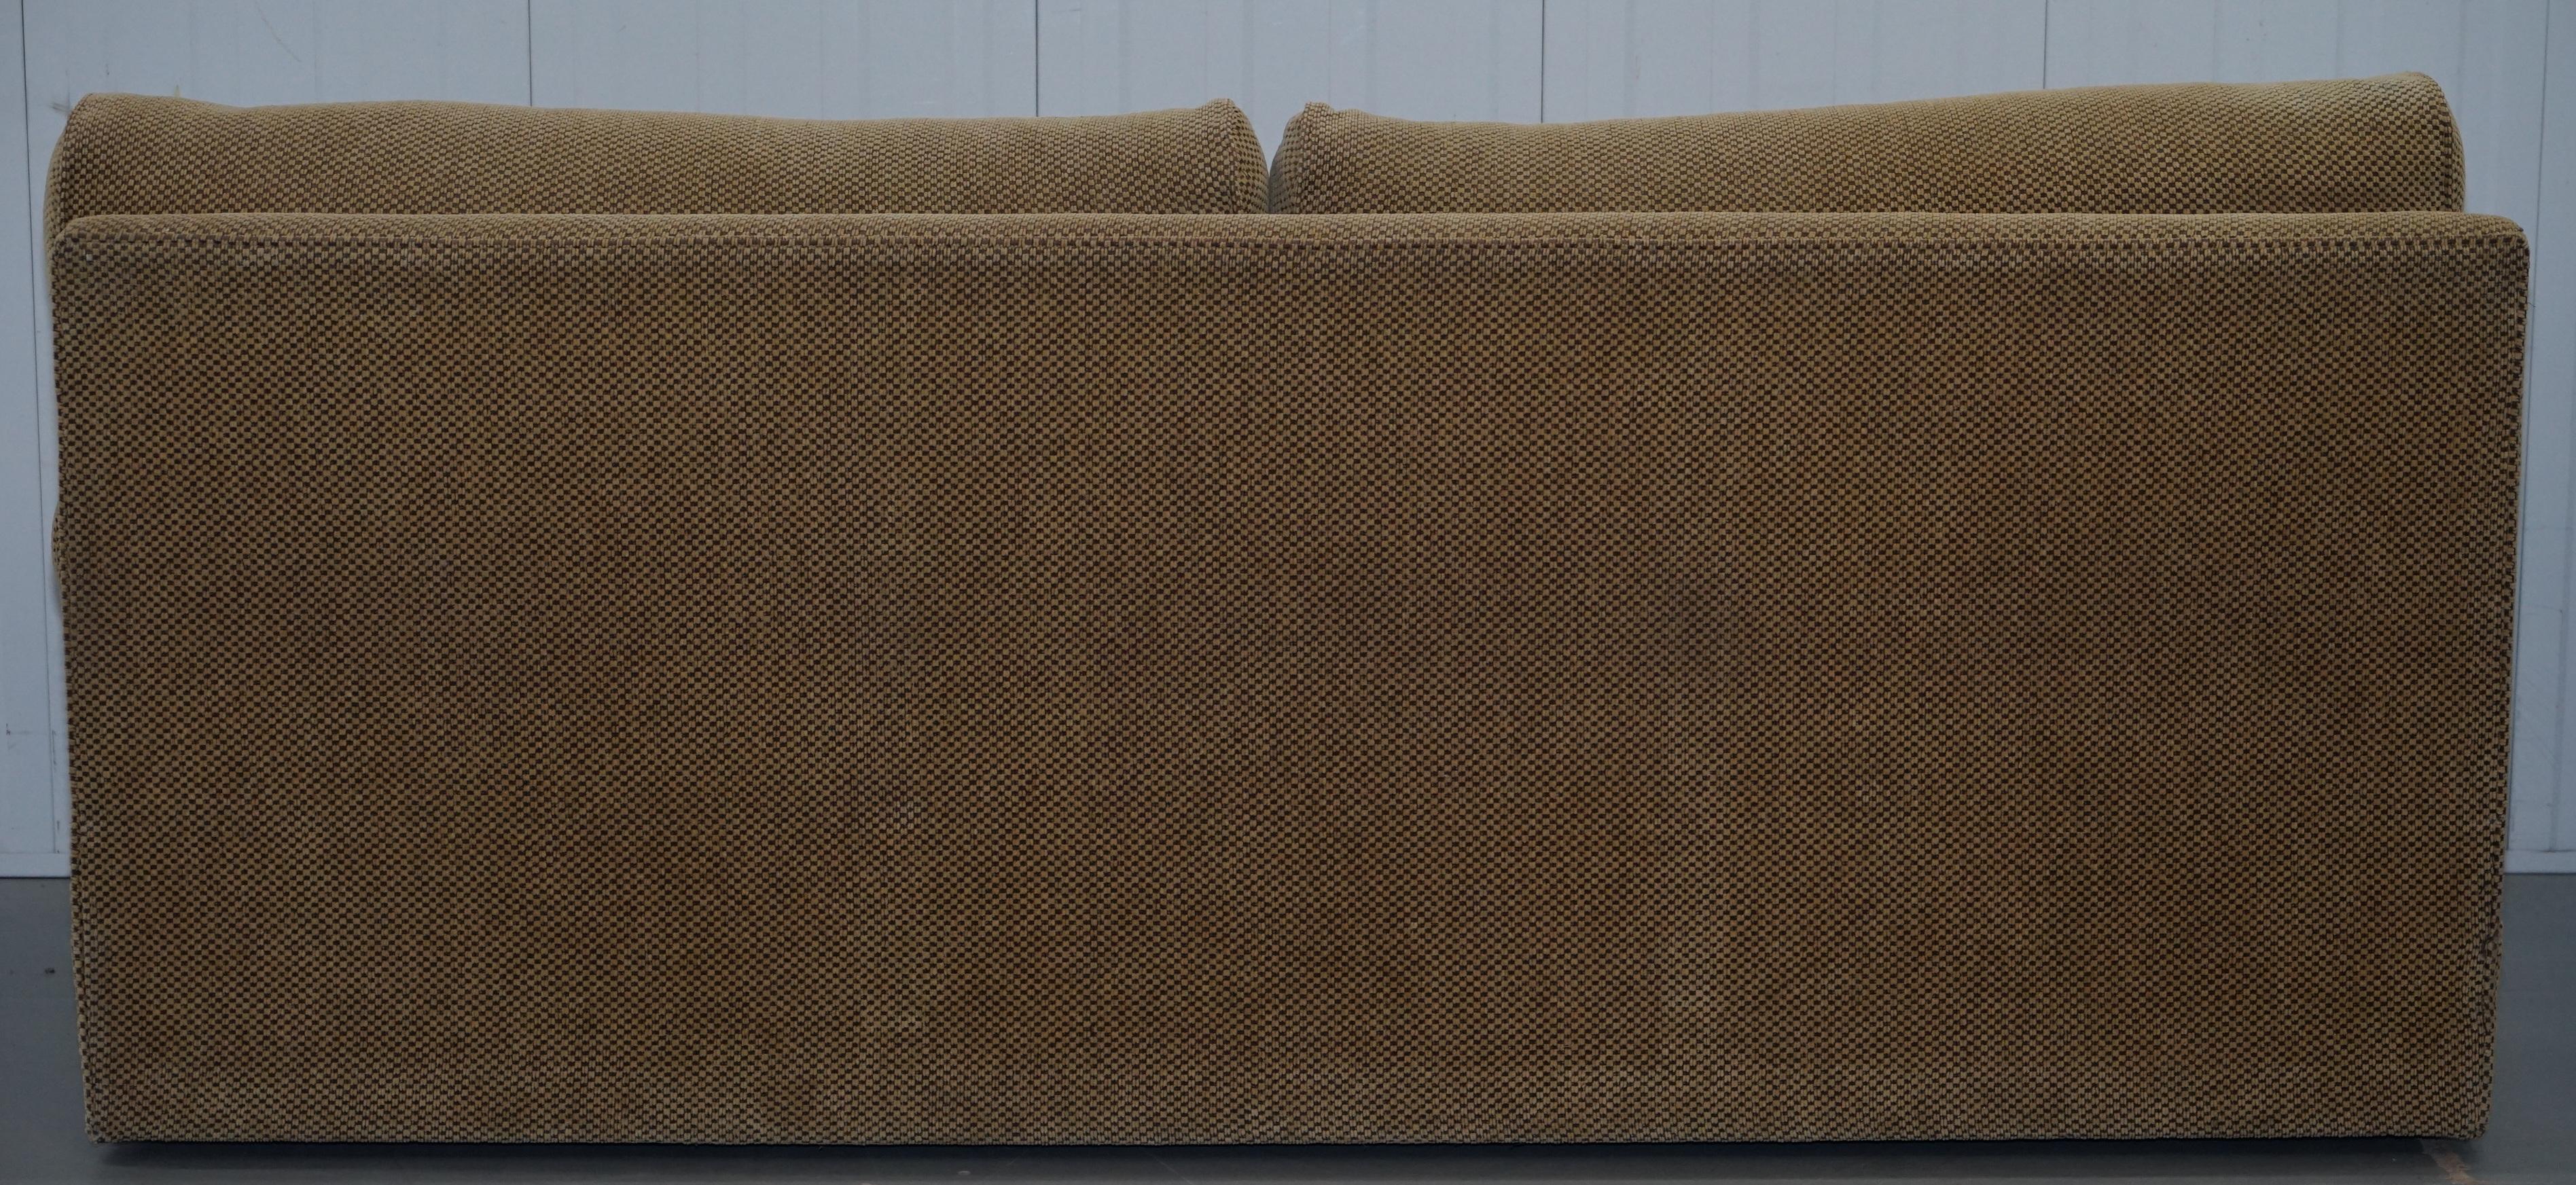 George Smith Bolster Three-Seat Sofa Feather Filled Cushions Stamped 5